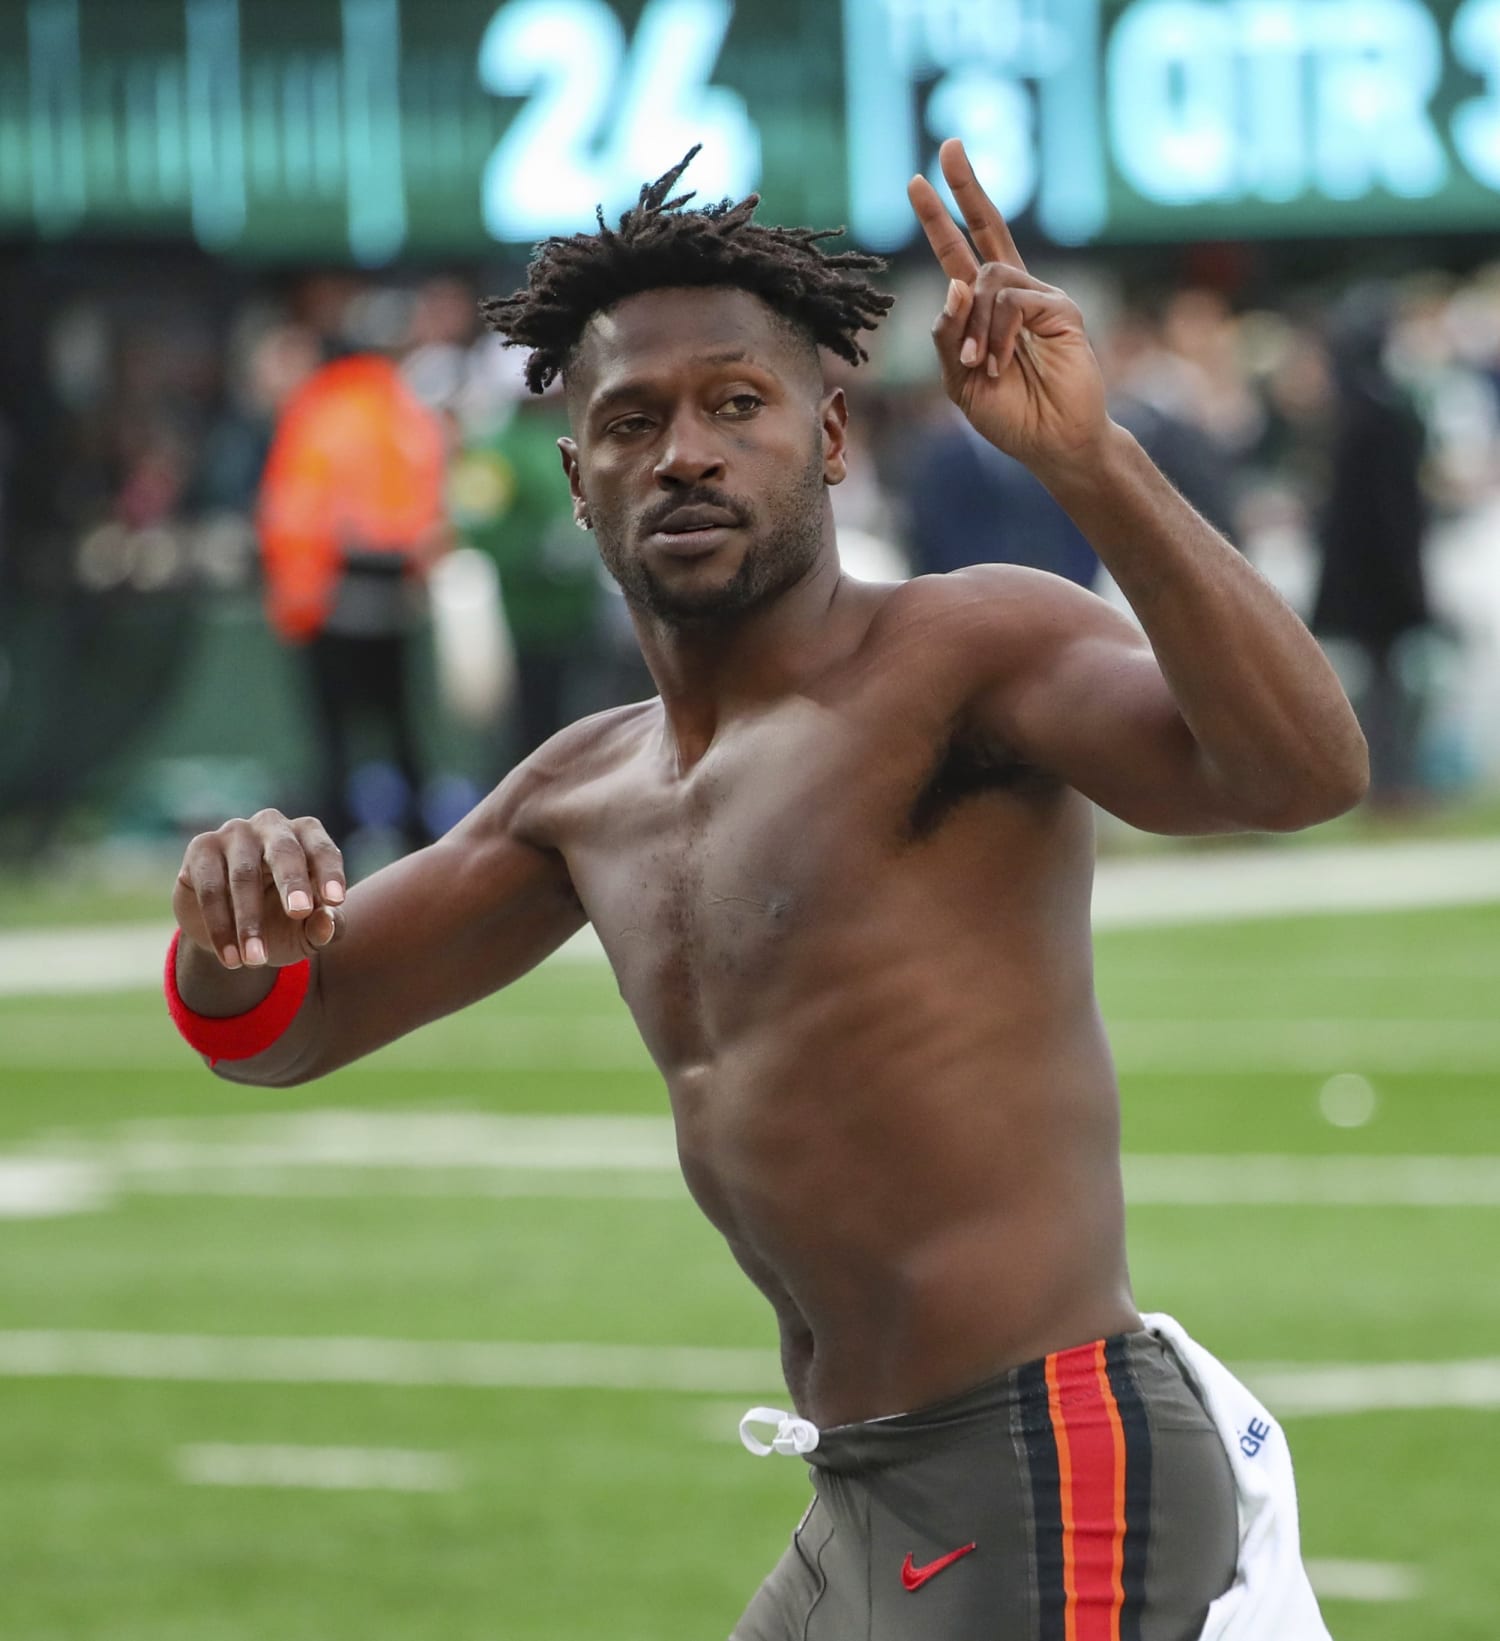 Antonio Brown removes jersey, storms off field in dramatic team exit